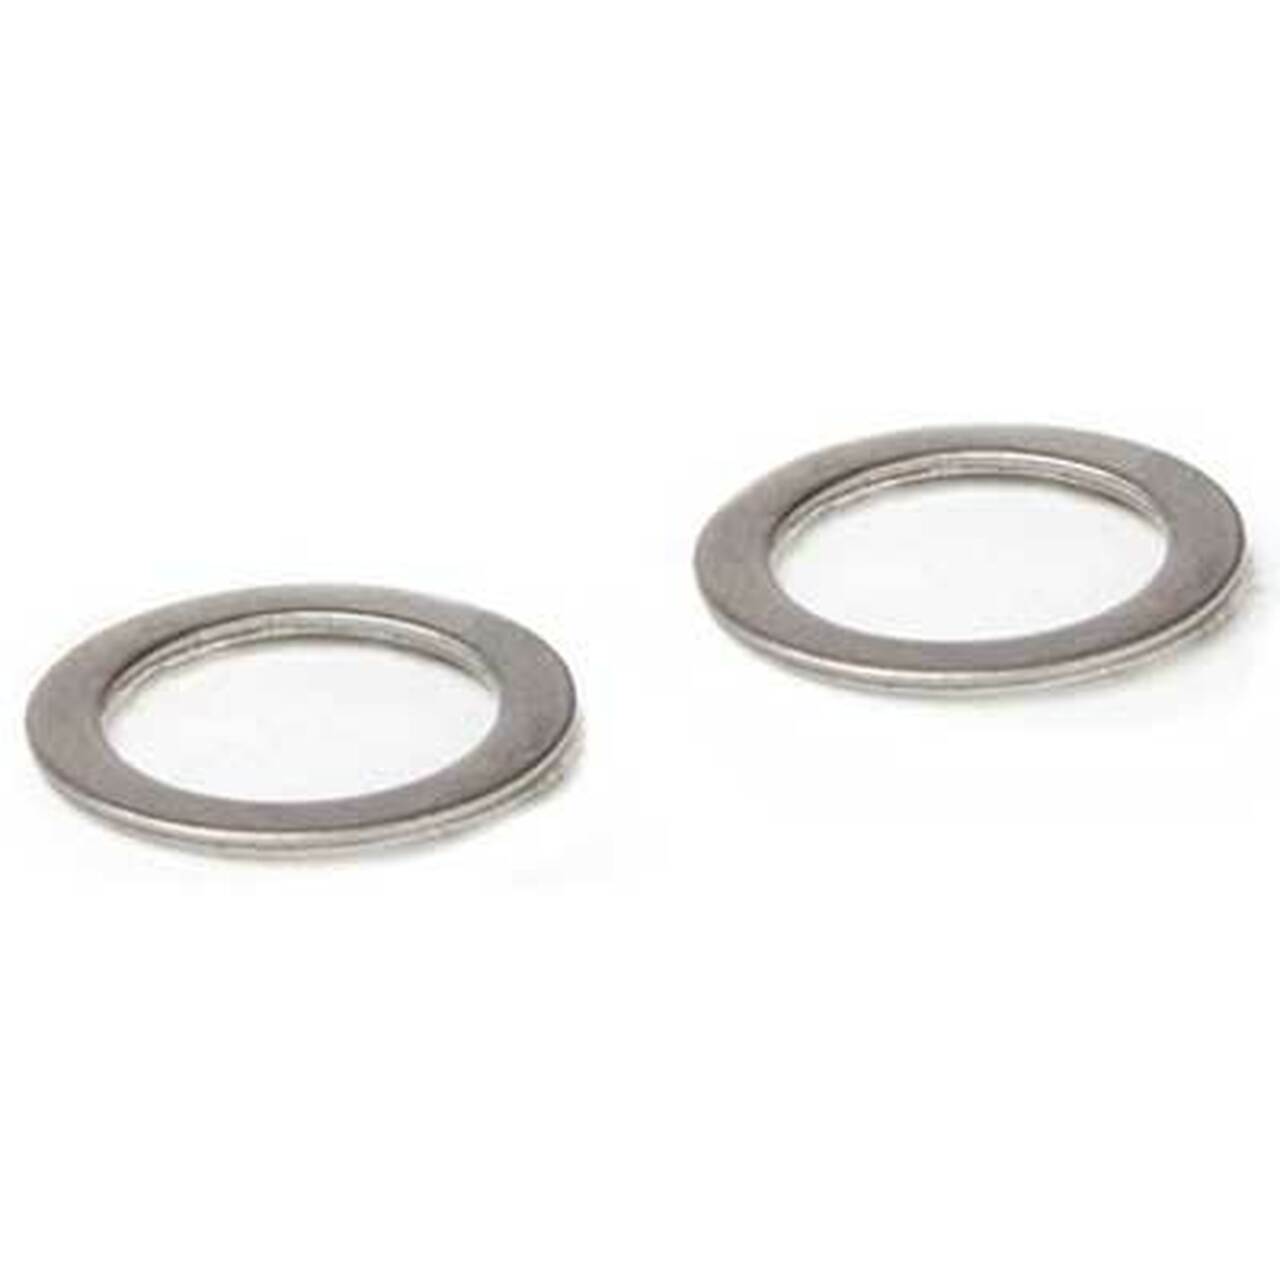 Promaster 5682 Mobile Lens Accessory Magnetic Mount (2-Pack)